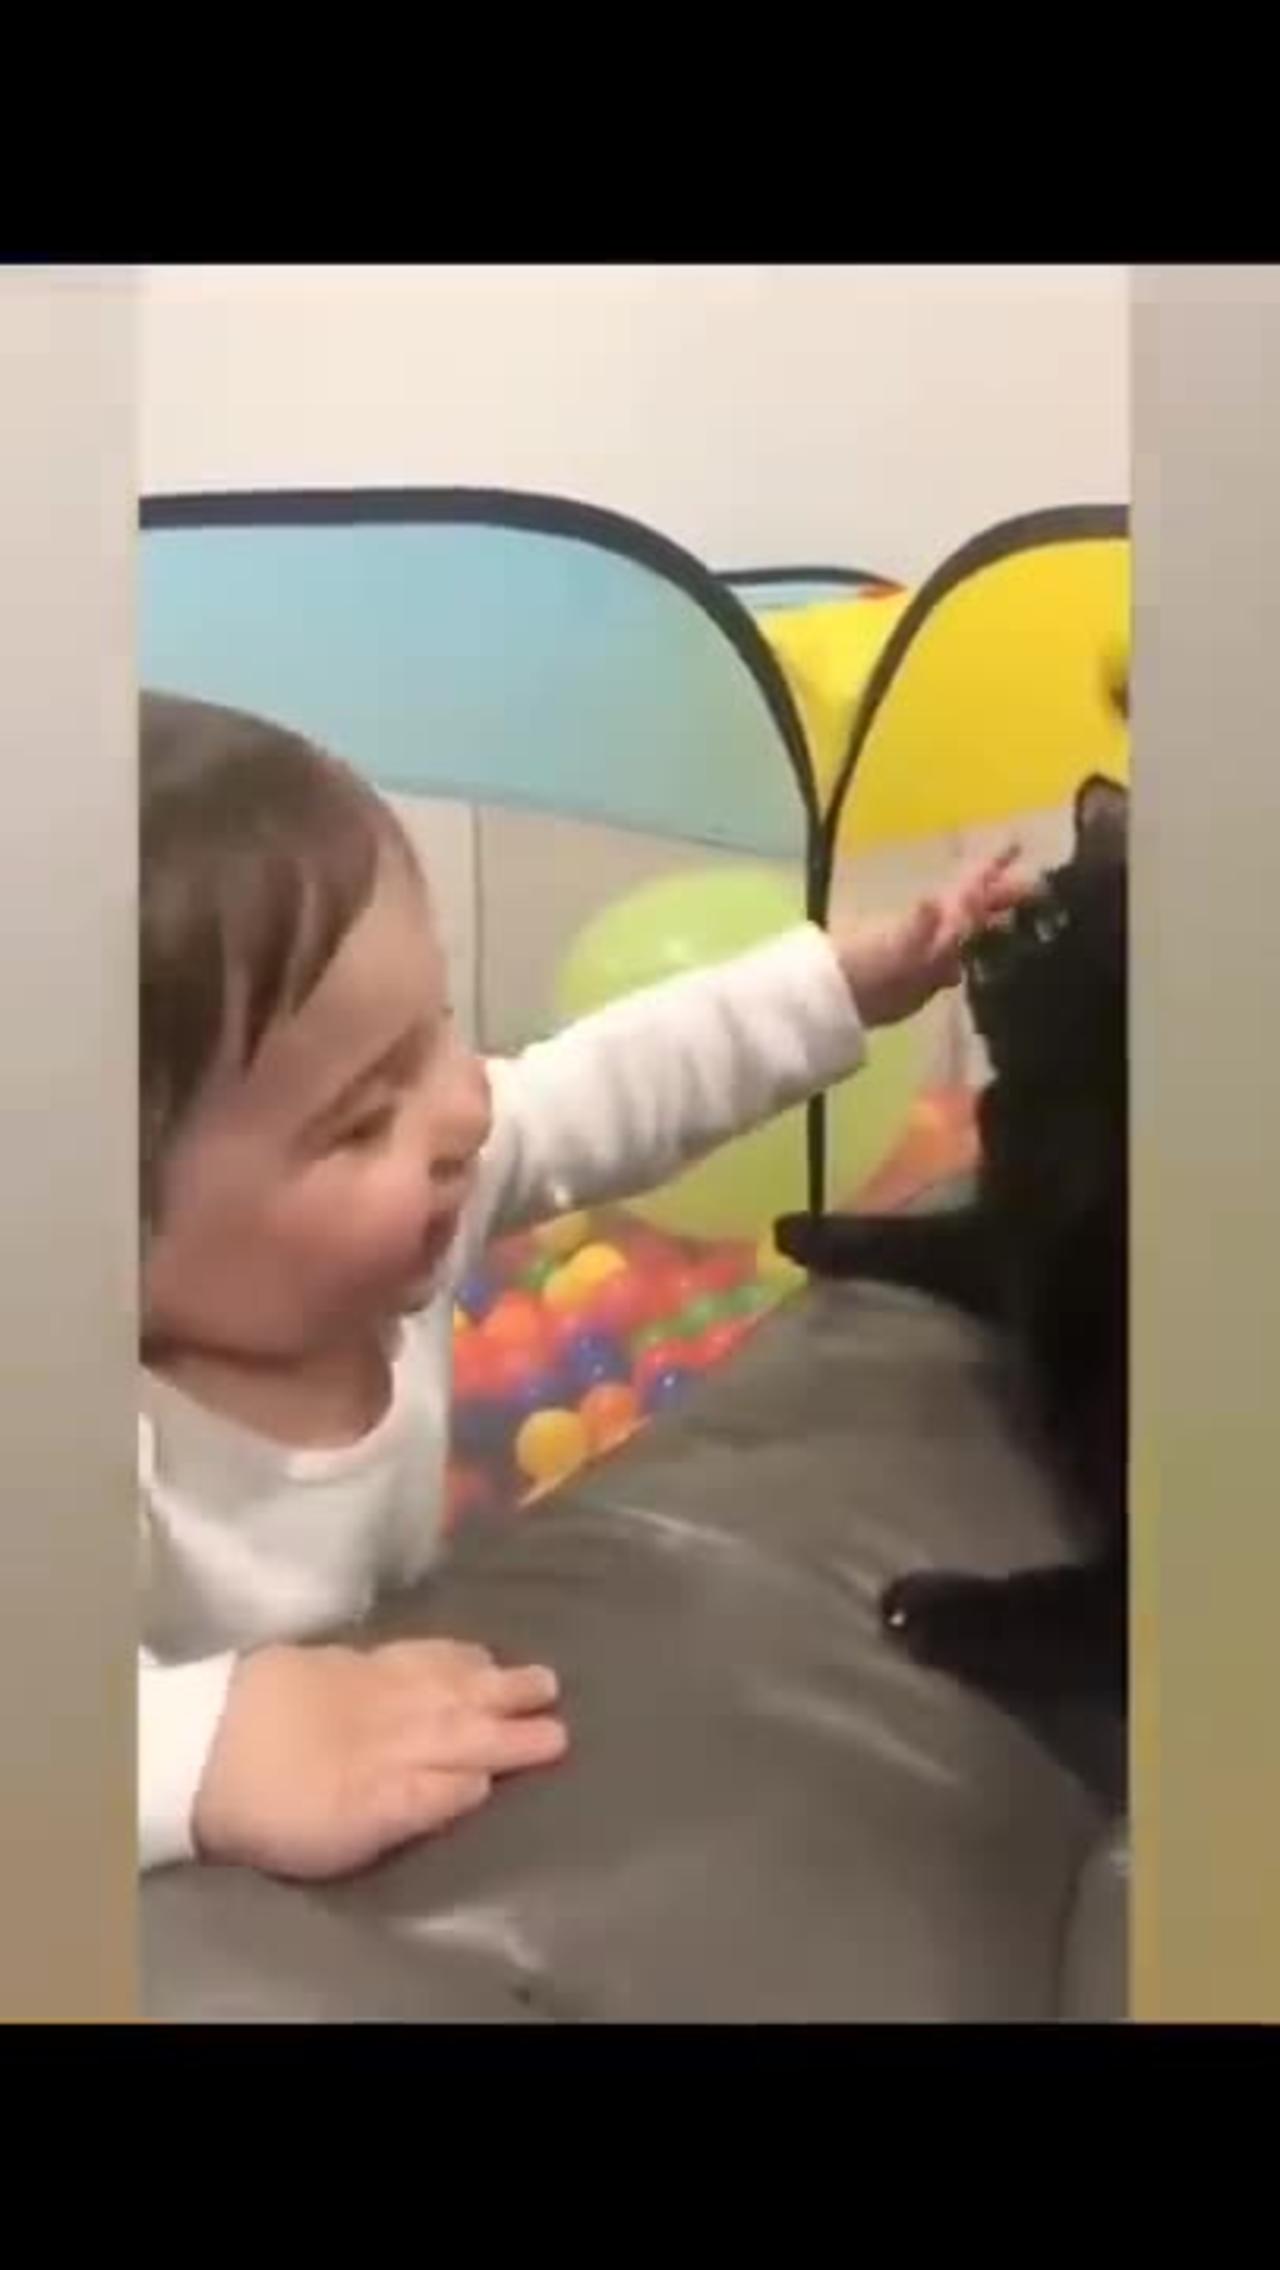 Cute baby playing with animal 🤣funny video